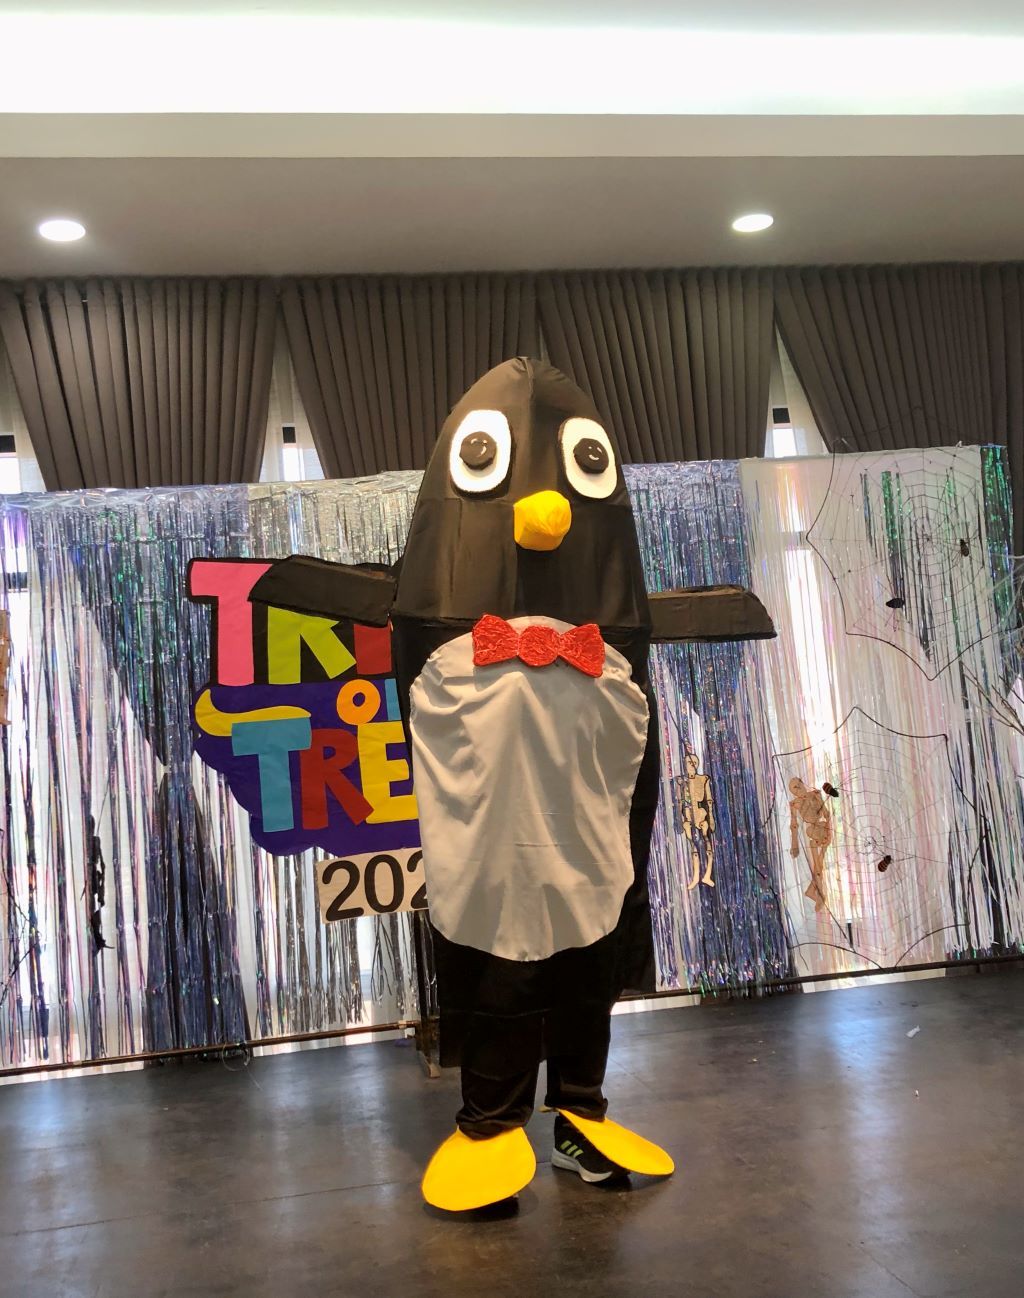 Toy Story's Wheezy the Penguin reigned as the winner of Best Costume